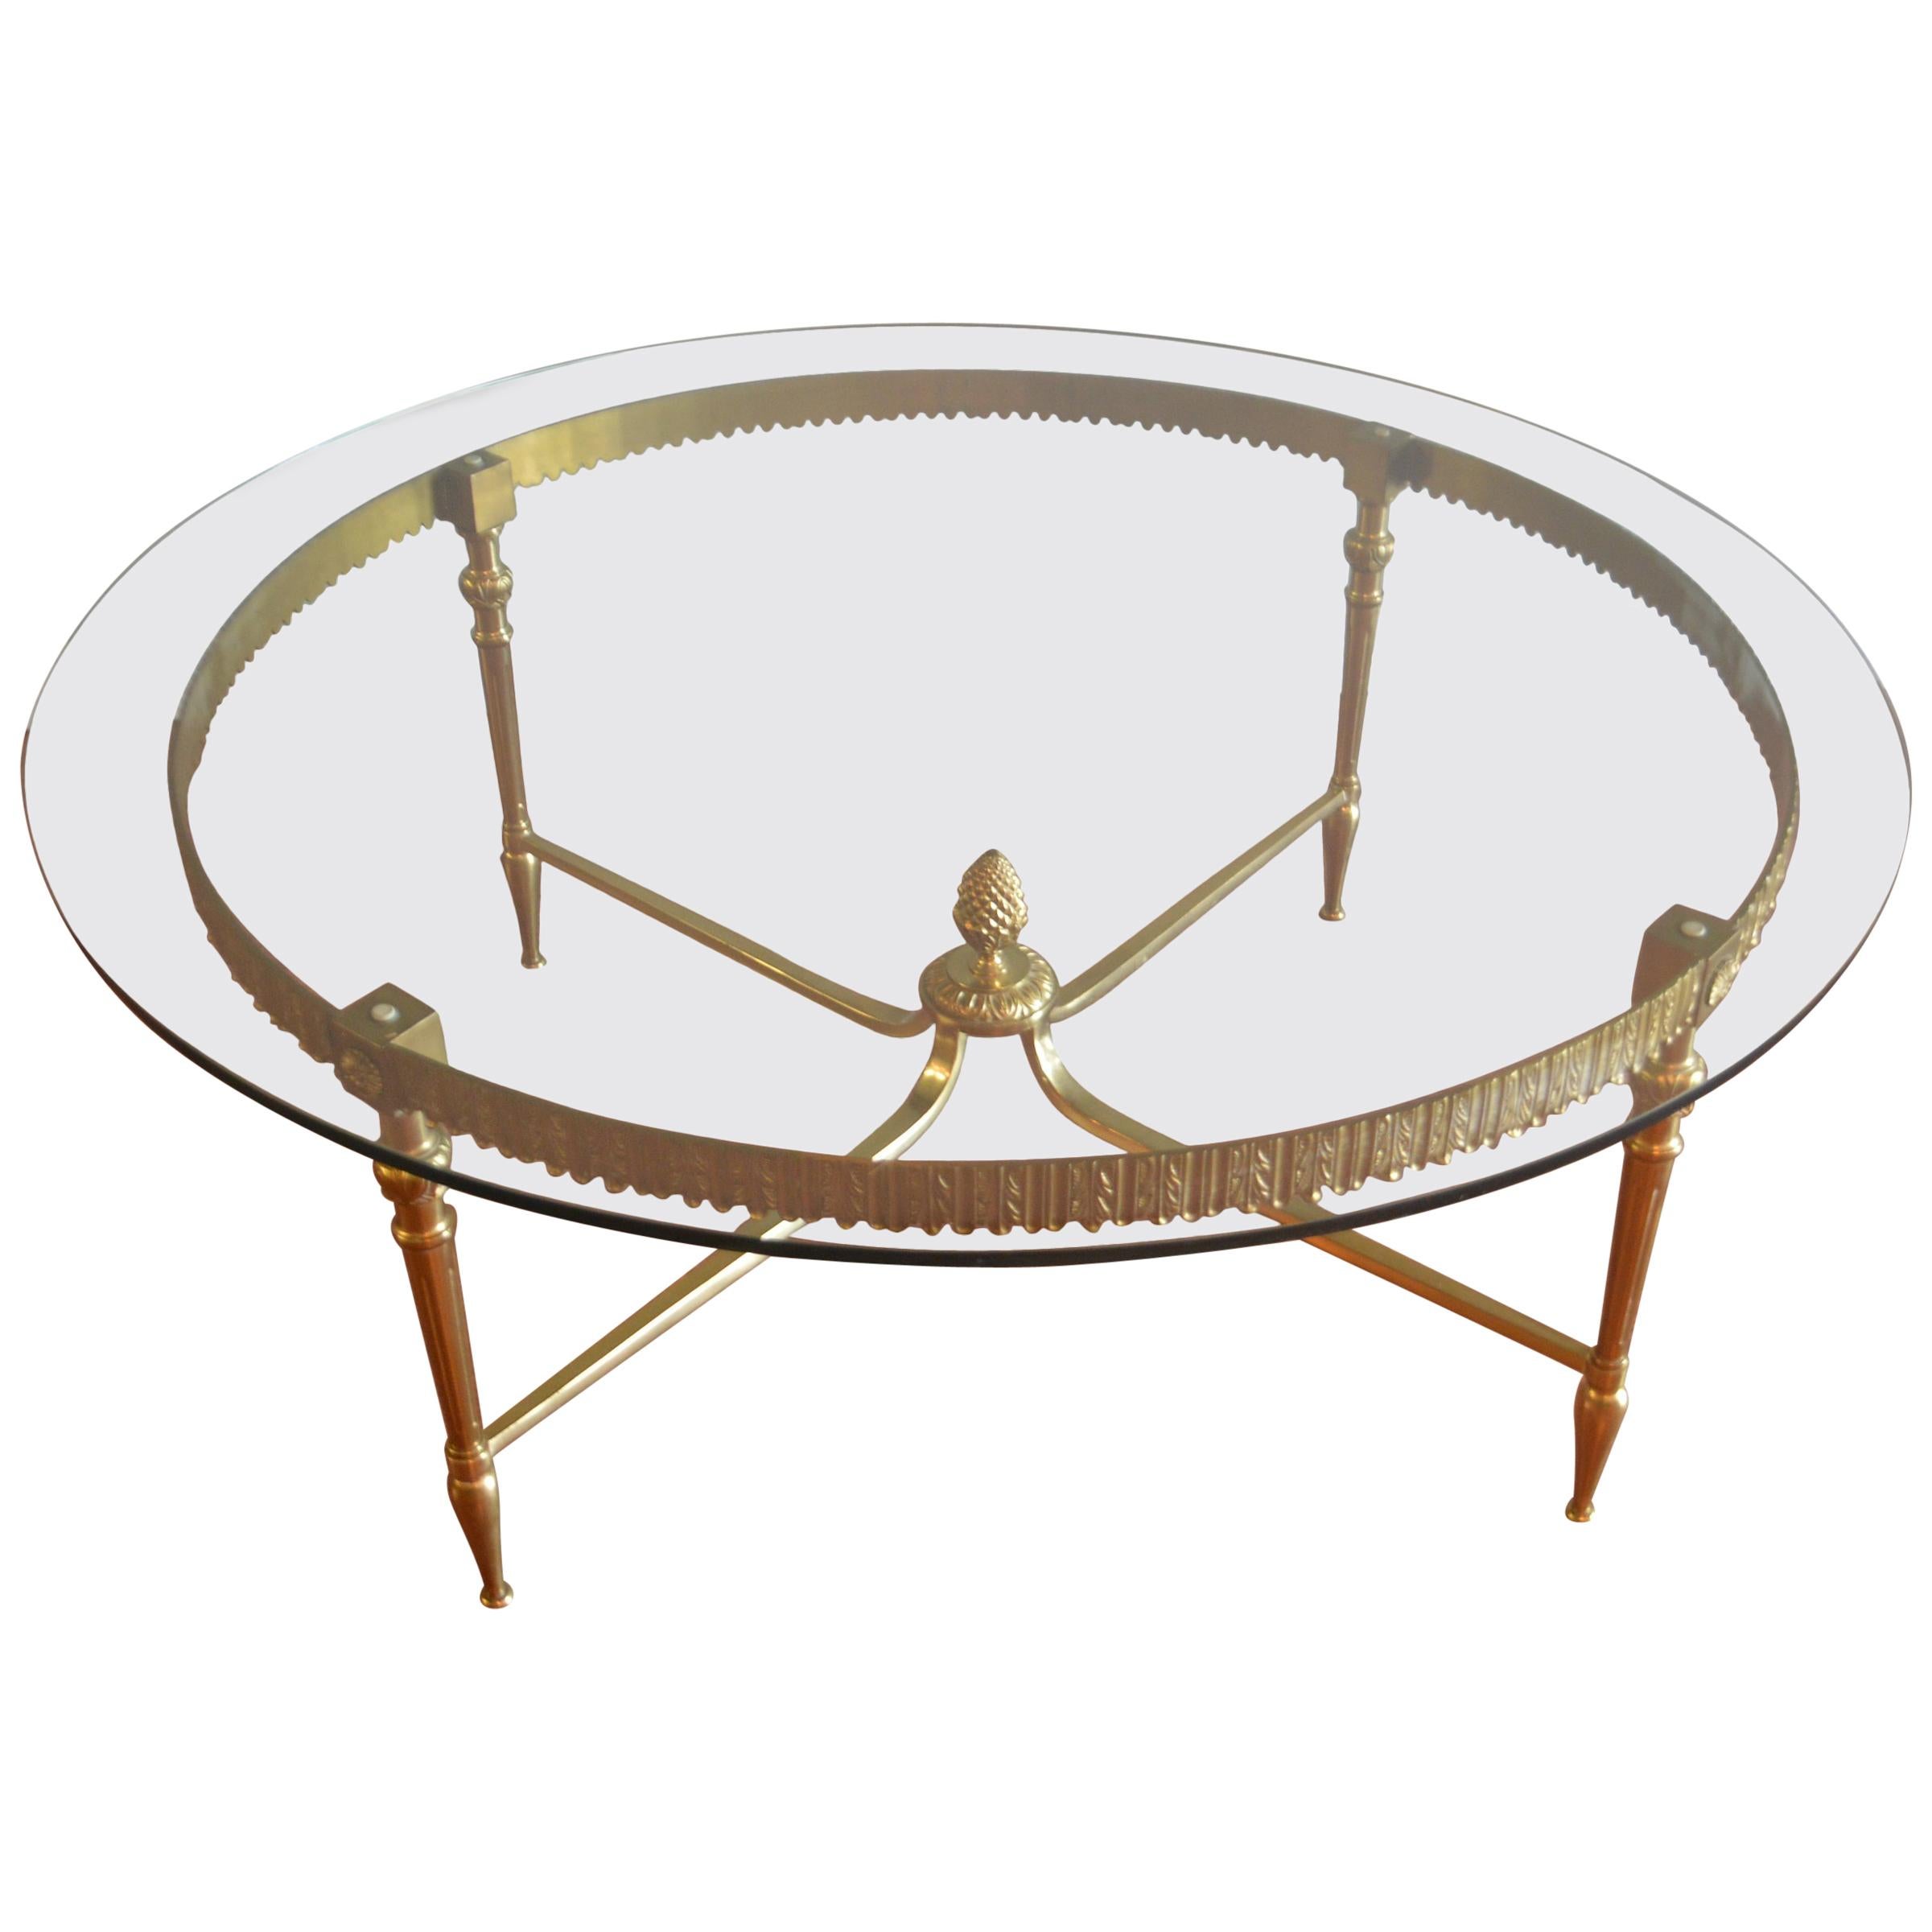 Brass Round Coffee Table with Ornate Apron, Brass Pineapple at Base, Round For Sale